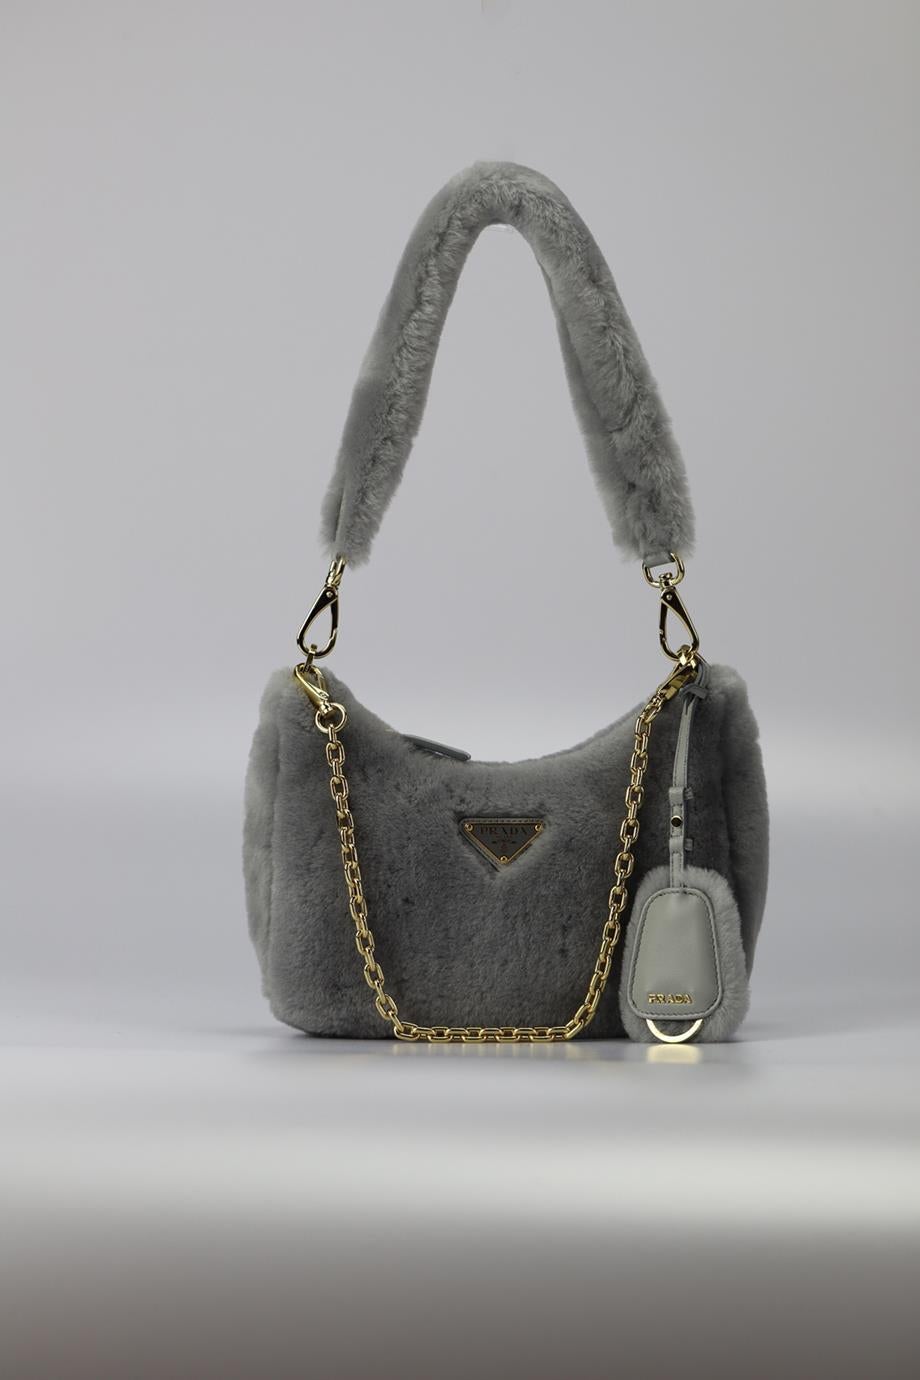 Prada Re-edition Shearling And Leather Shoulder Bag. Grey. Zip fastening - Top. Comes with leather shoulder strap. Comes with - authenticity card. Does not come with - dustbag or box.. Height: 6.7 In. Width: 9.2 In. Depth: 3.1 In. Handle drop: 10.3